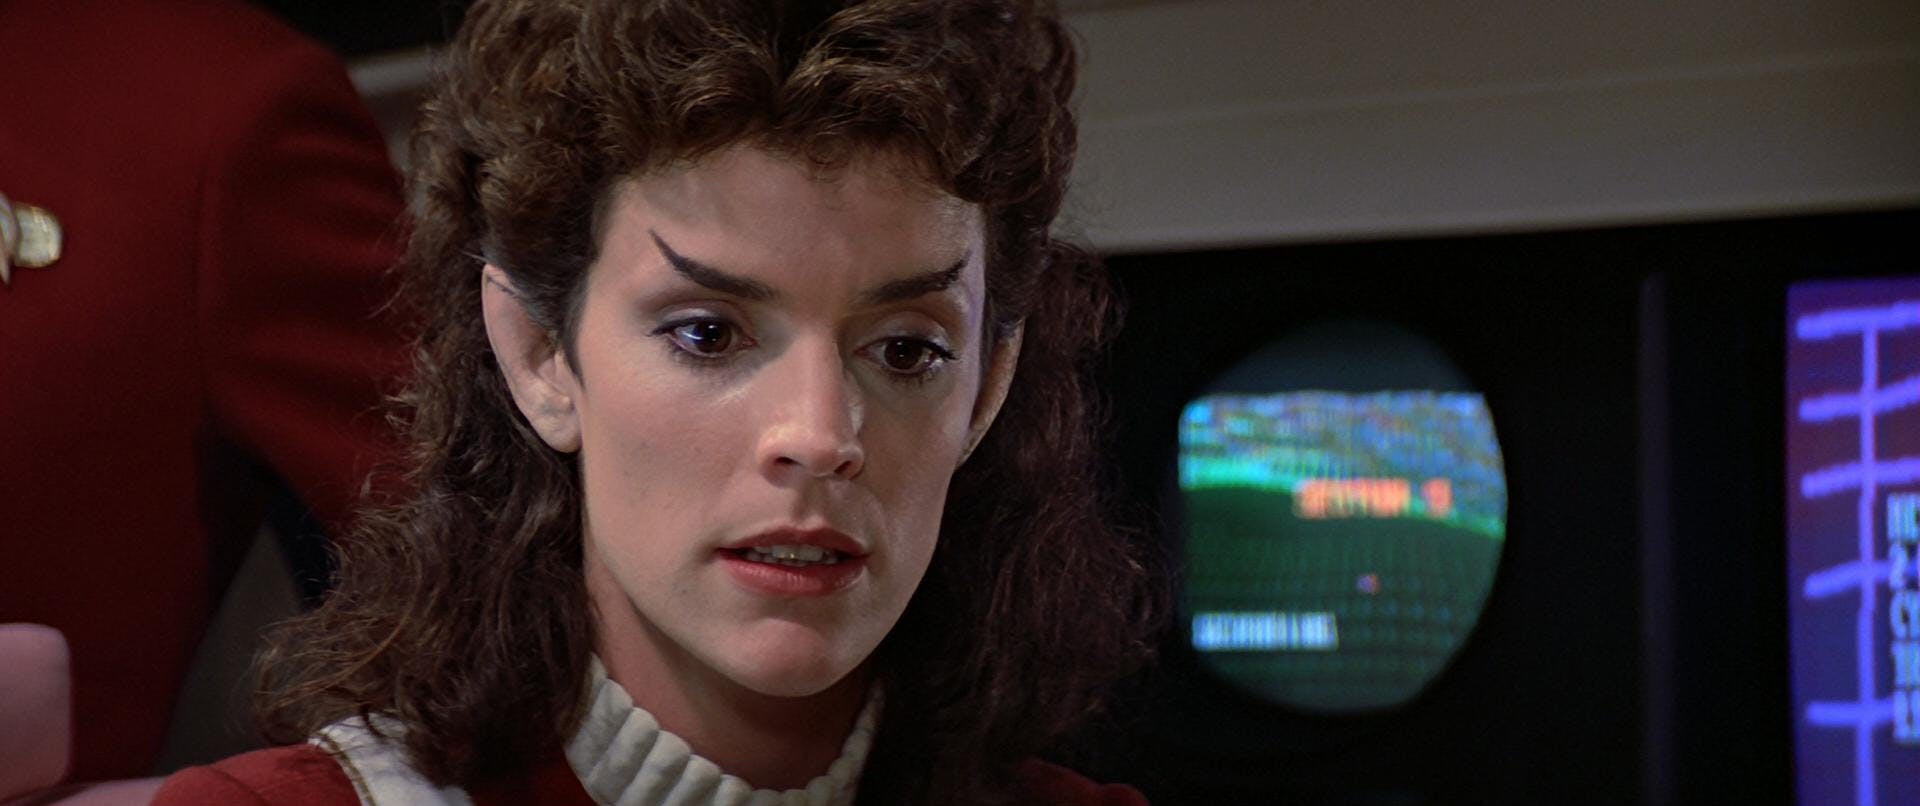 Saavik looks down at her control monitors in The Search for Spock